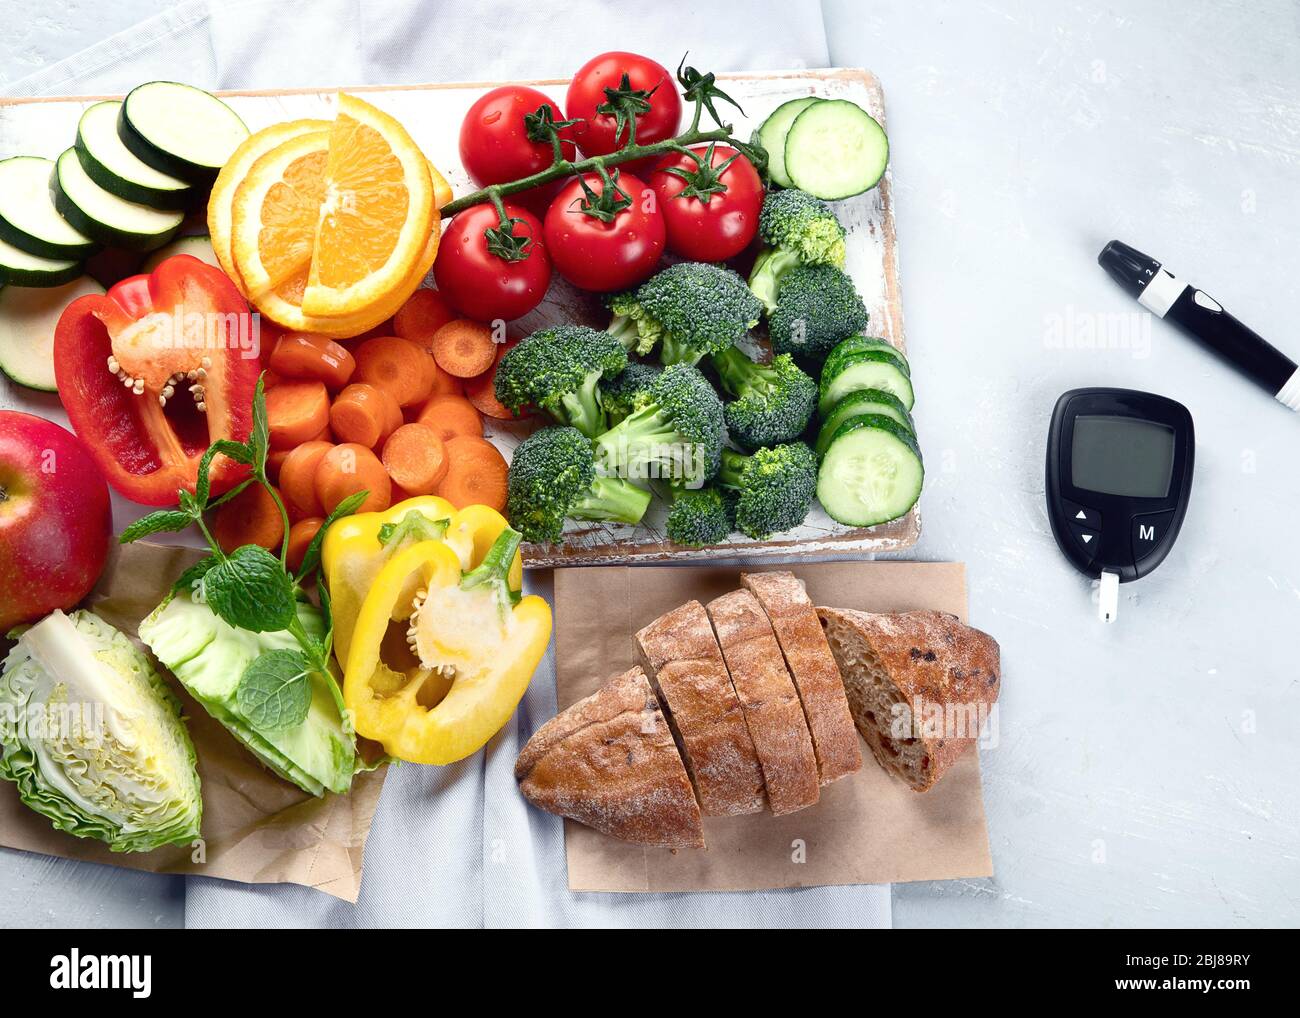 Low glycemic healthy foods for  diabetic diet. Food with foods high in vitamins, minerals,  antioxidants, smart carbohydrates. Top view Stock Photo